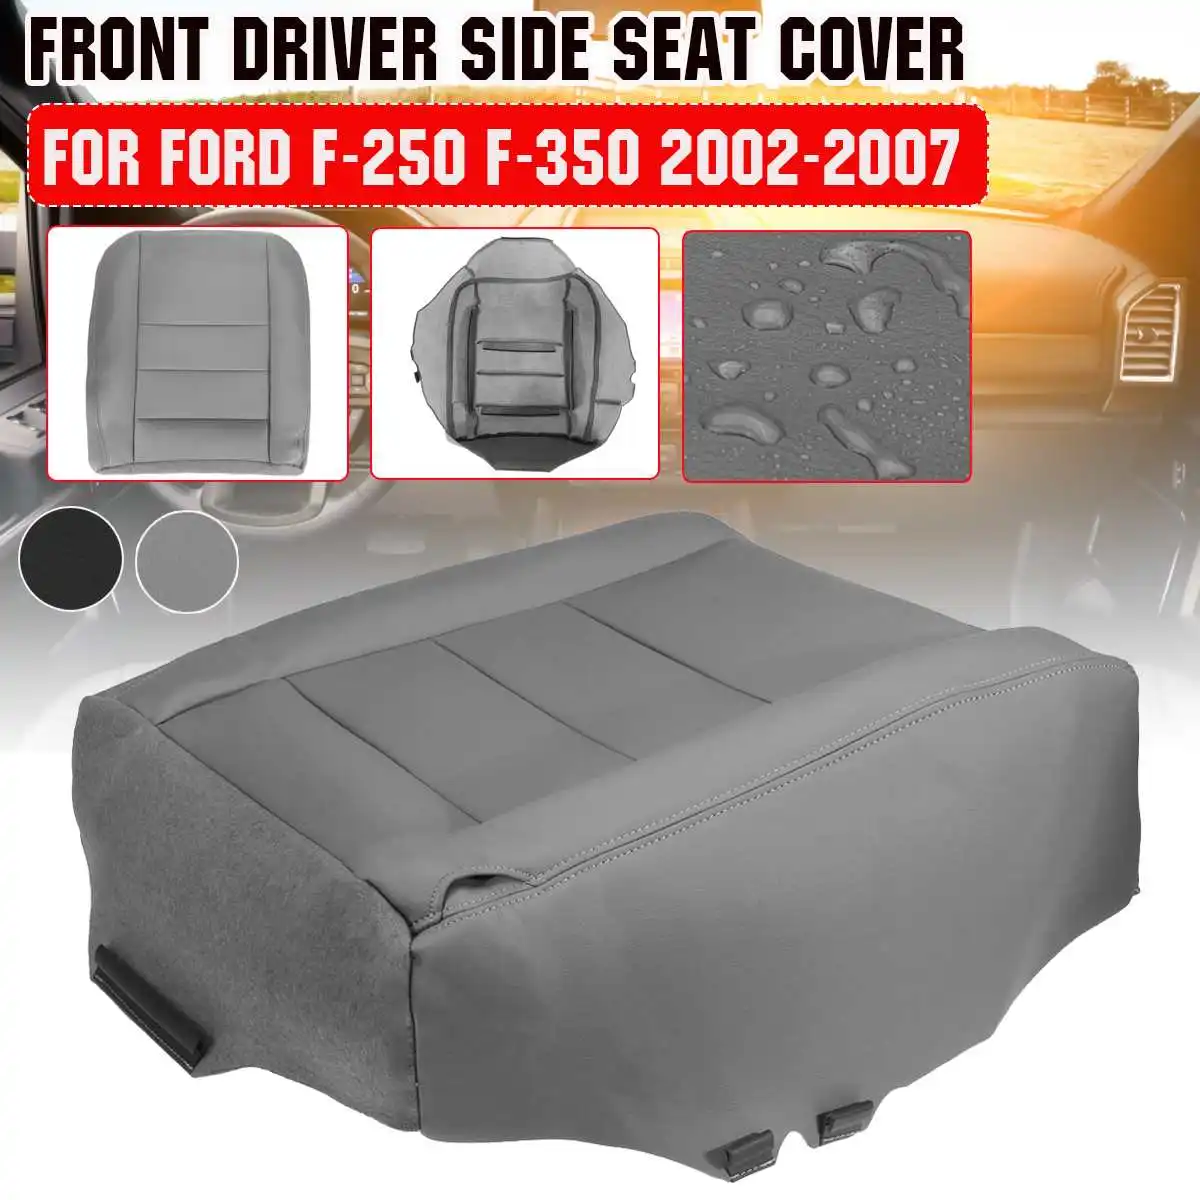 Front Driver Side Bottom Seat Cover PU Leather Waterproof For Ford F250 F350 Super Duty Lariat 2002 2003 2004 2005 2006 2007